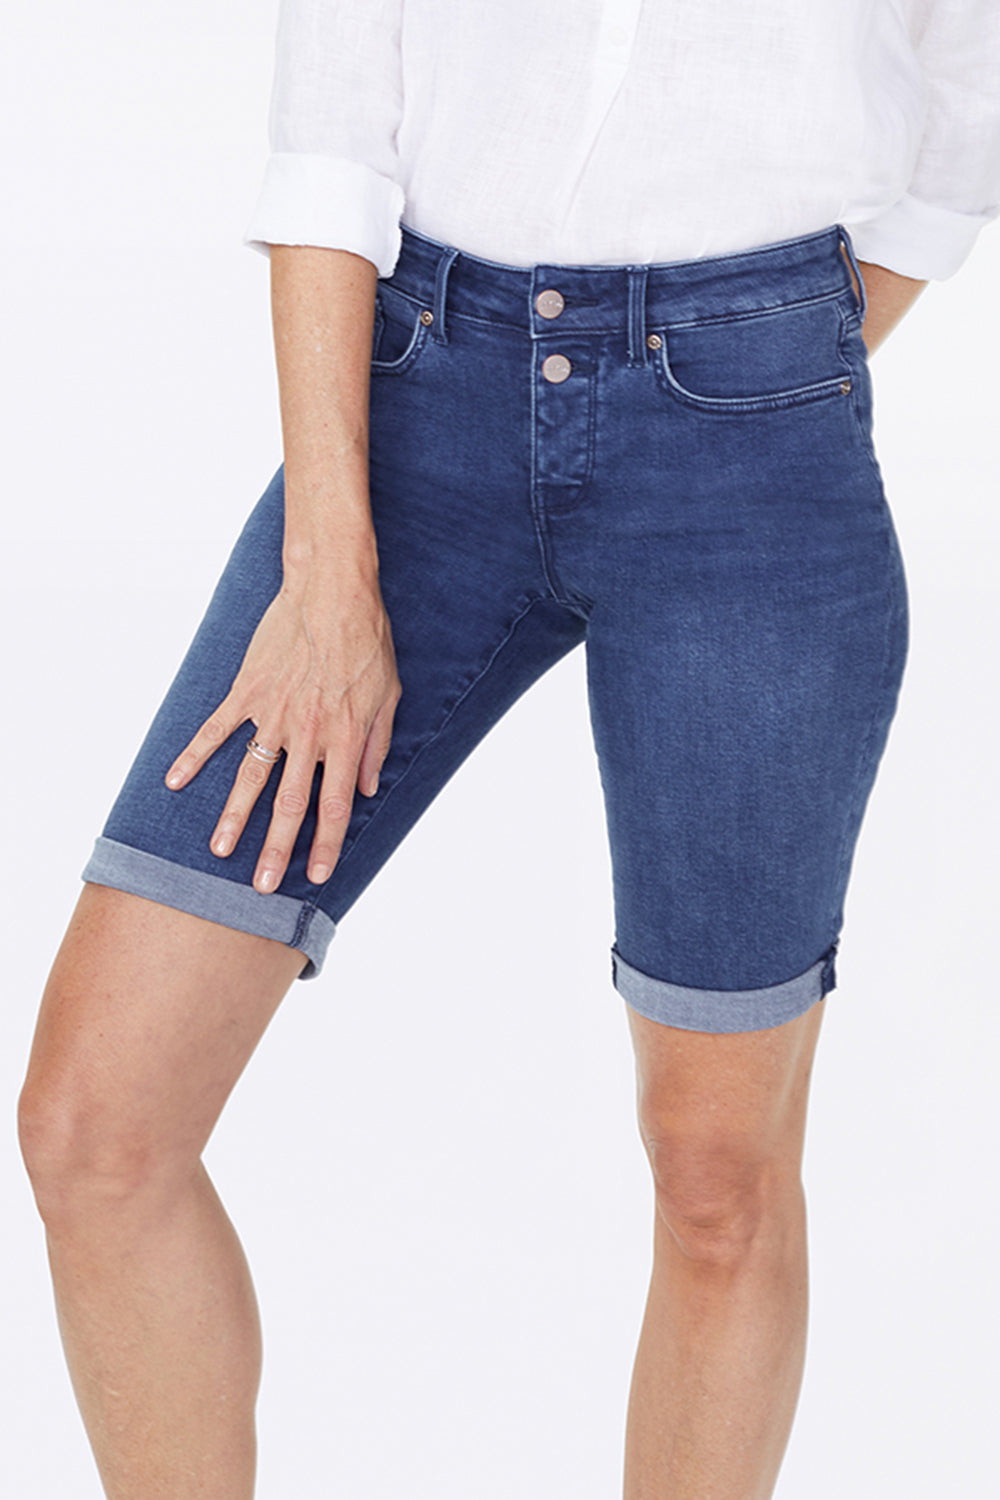 NYDJ Briella 11 Inch Denim Shorts With Double-Button Waistband And Roll Cuffs - Nevin